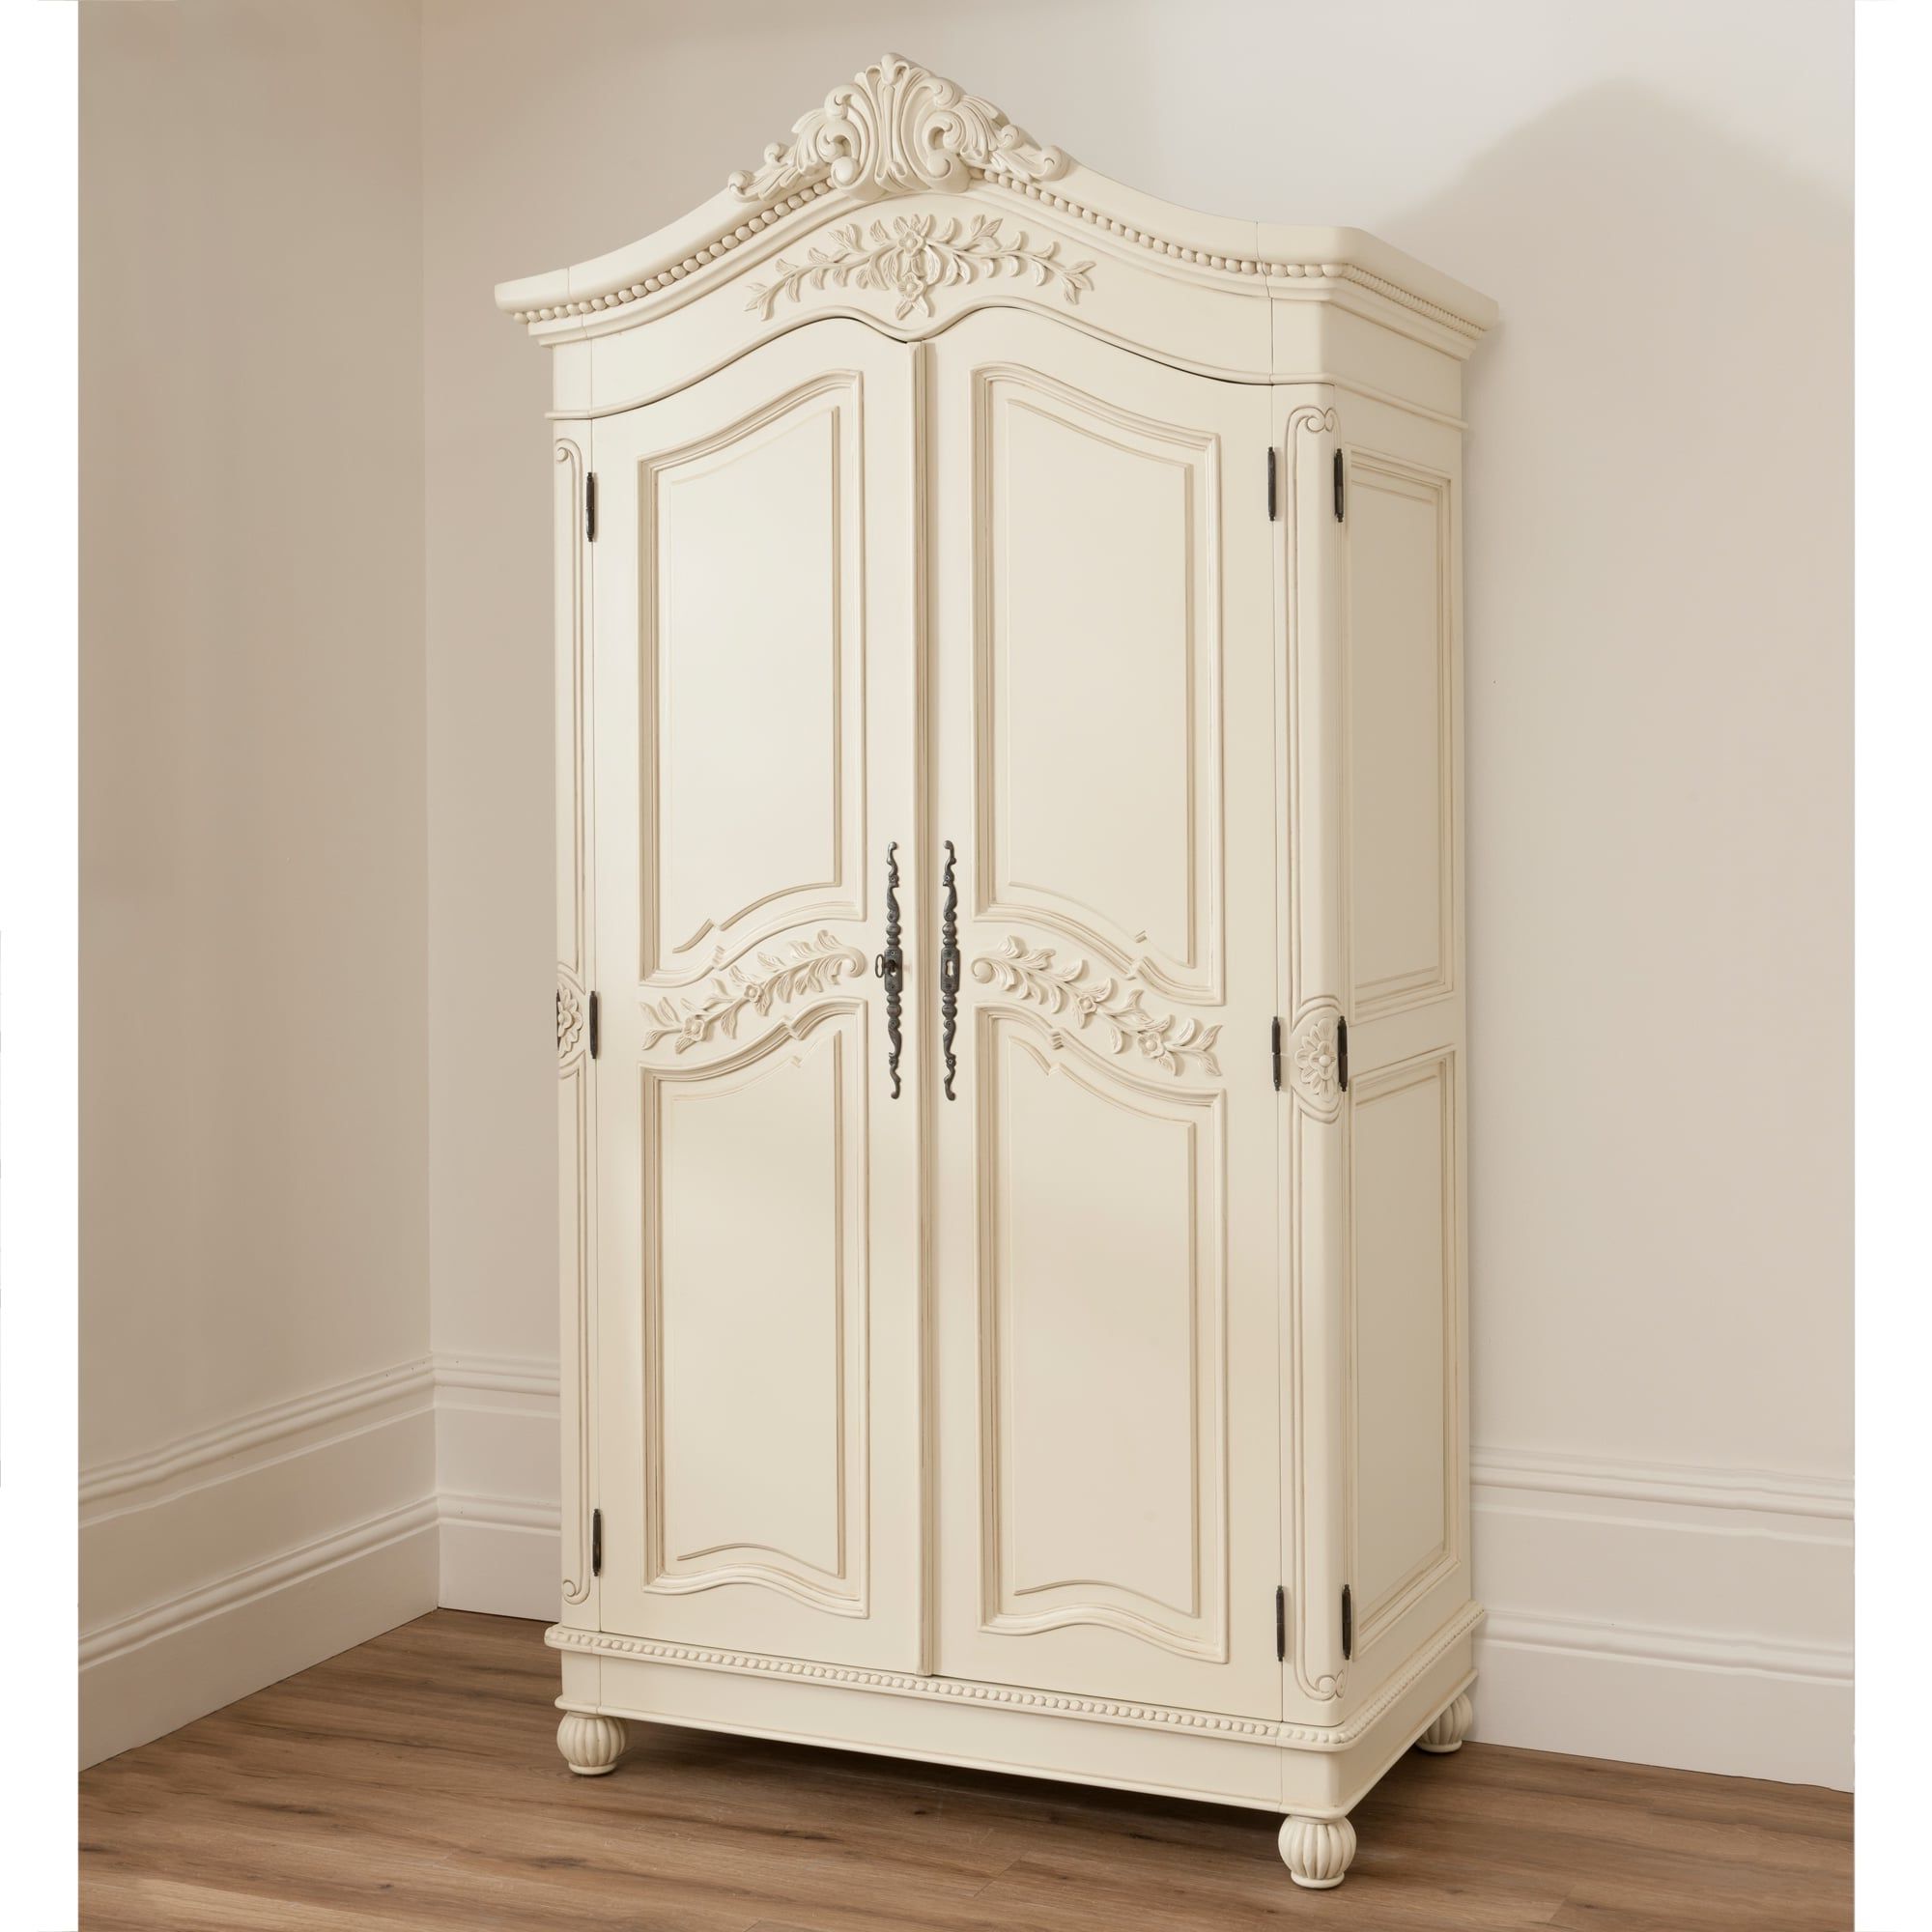 Bordeaux Ivory Shabby Chic Wardrobe | Shabby Chic Furniture Throughout Shabby Chic Wardrobes For Sale (View 14 of 20)